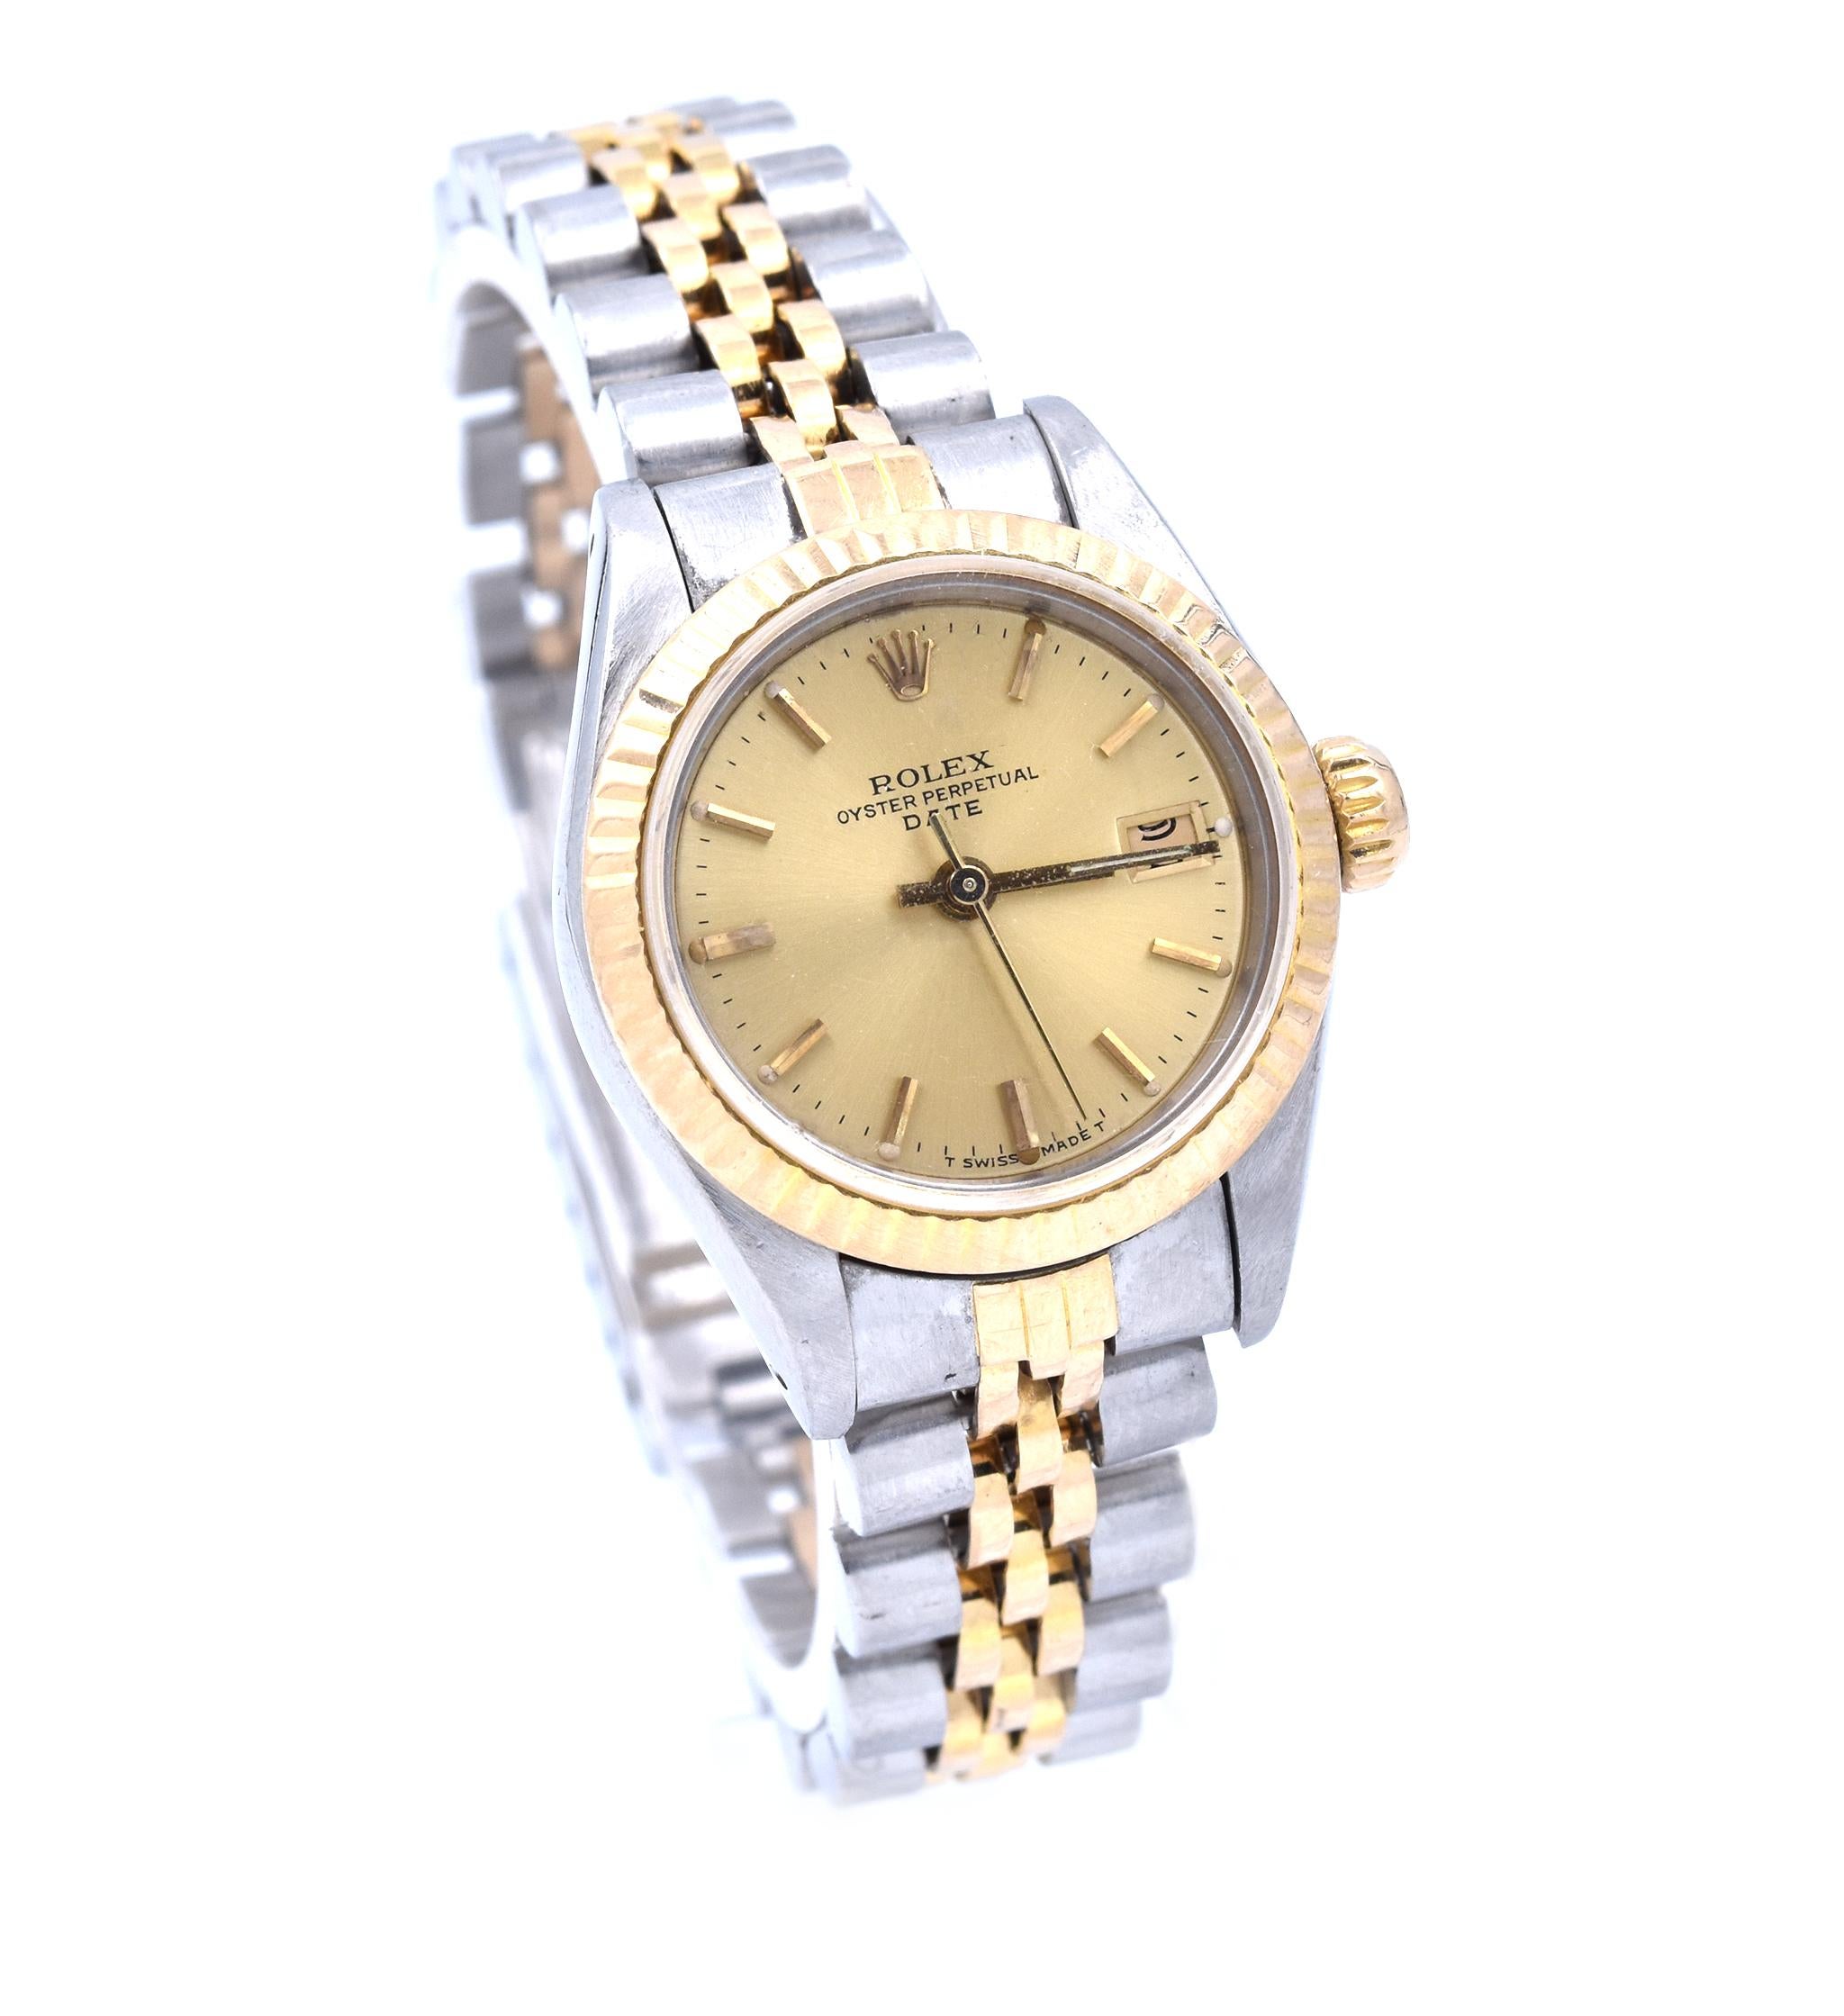 Movement: automatic
Function: hours, minutes, seconds, date at 3 o’clock 
Case: 26mm steel case, 18k yellow gold fluted bezel, sapphire crystal
Band: steel/18k yellow gold jubilee bracelet with folding clasp
Dial: champagne stick dial, yellow gold